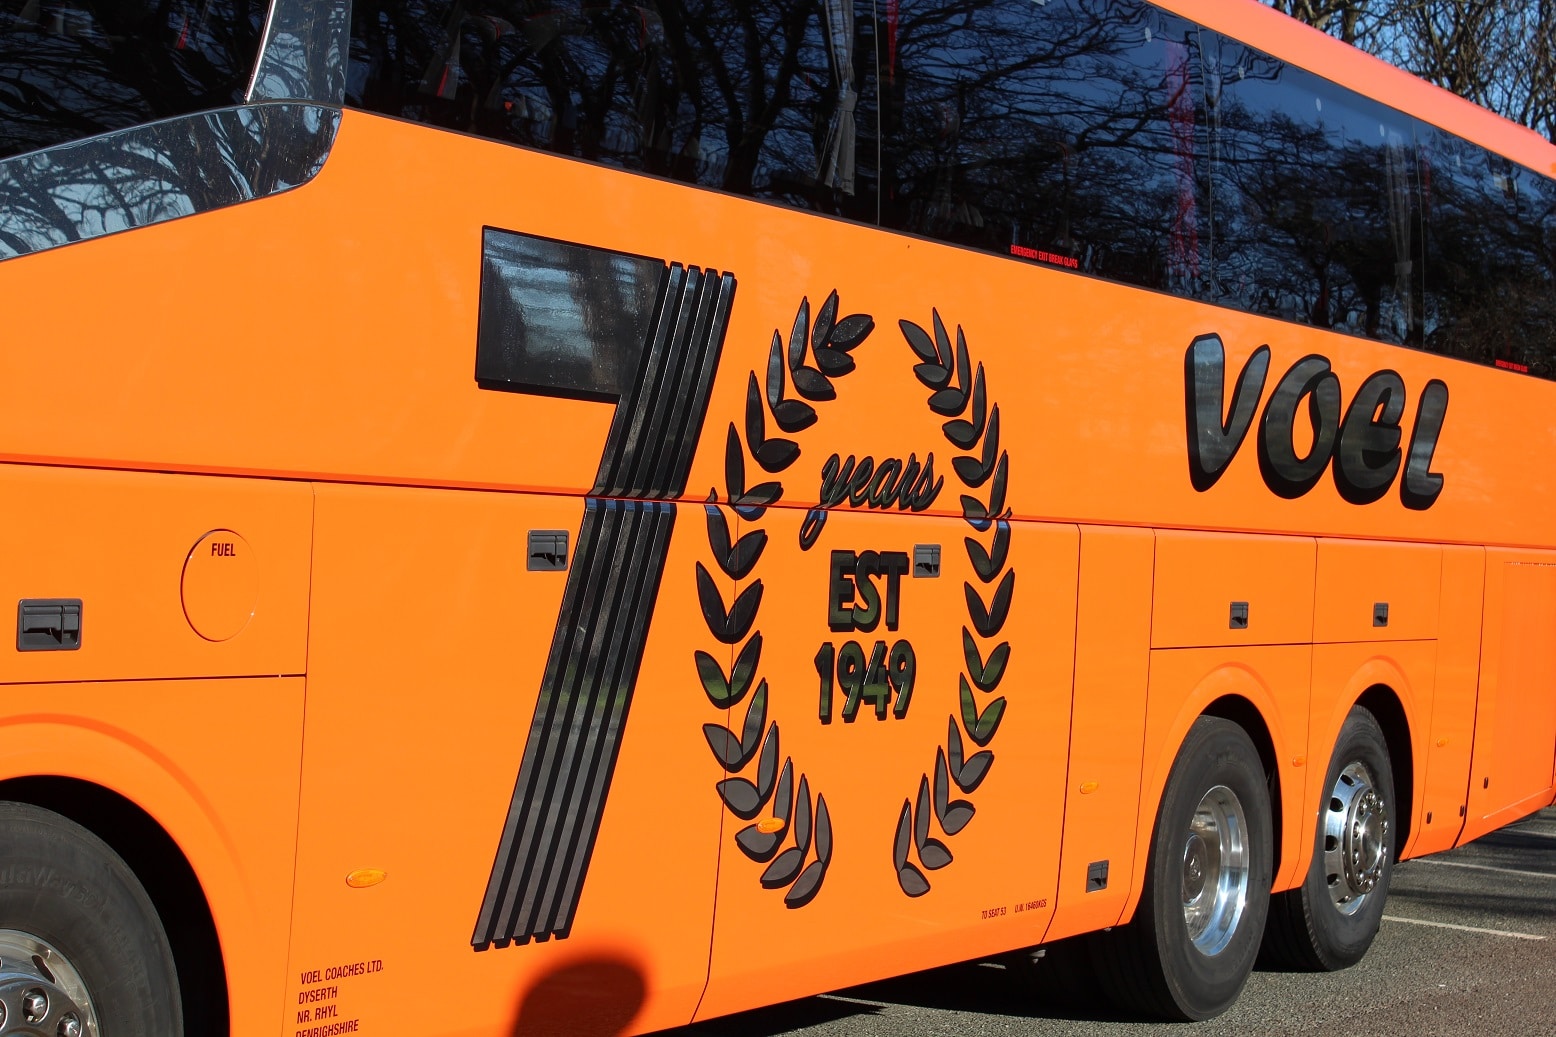 Voel Coaches 70 years